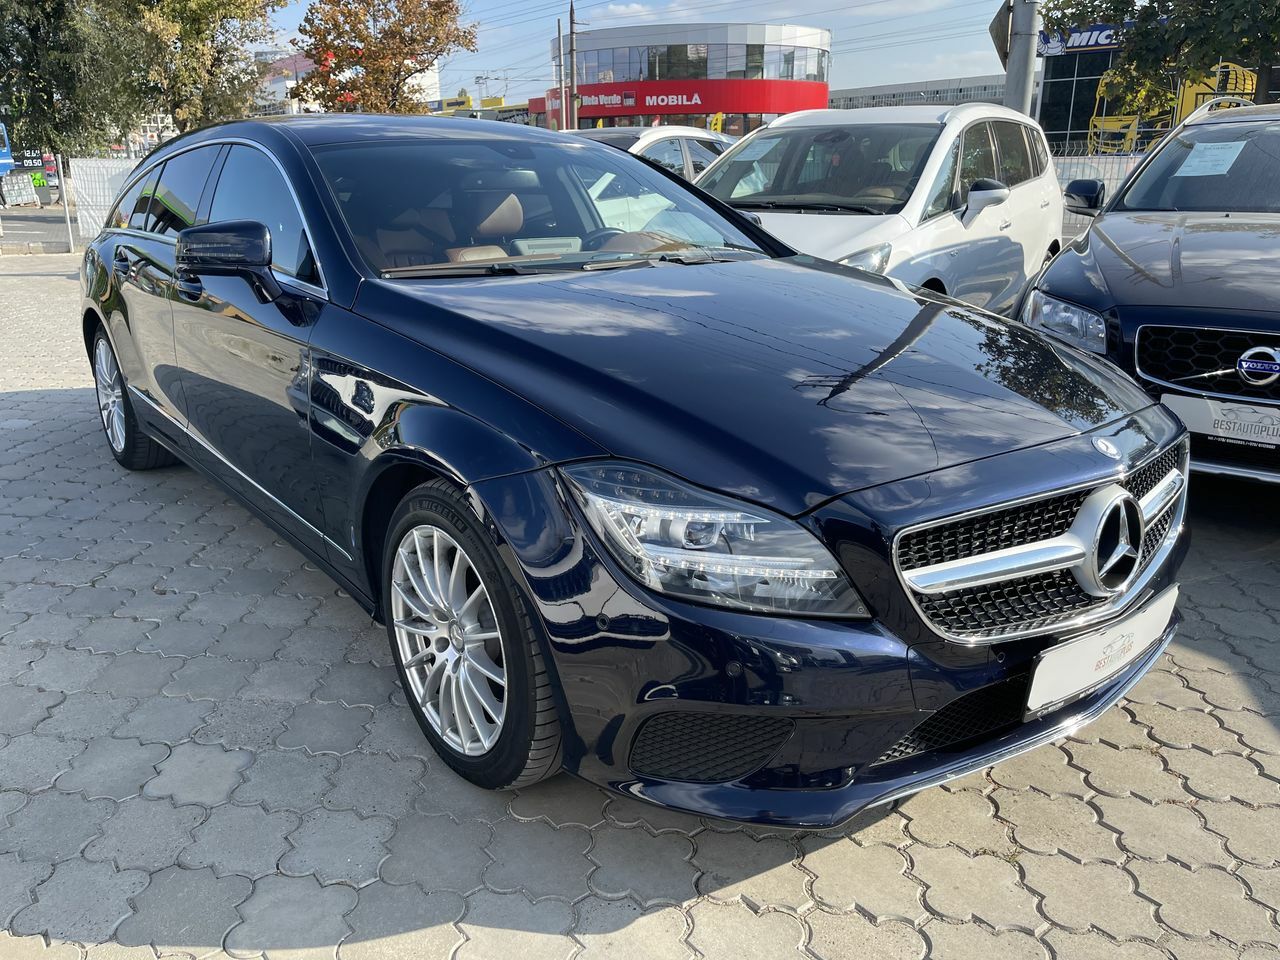 <span style="font-weight: bold;">mercedes cls 220d</span>